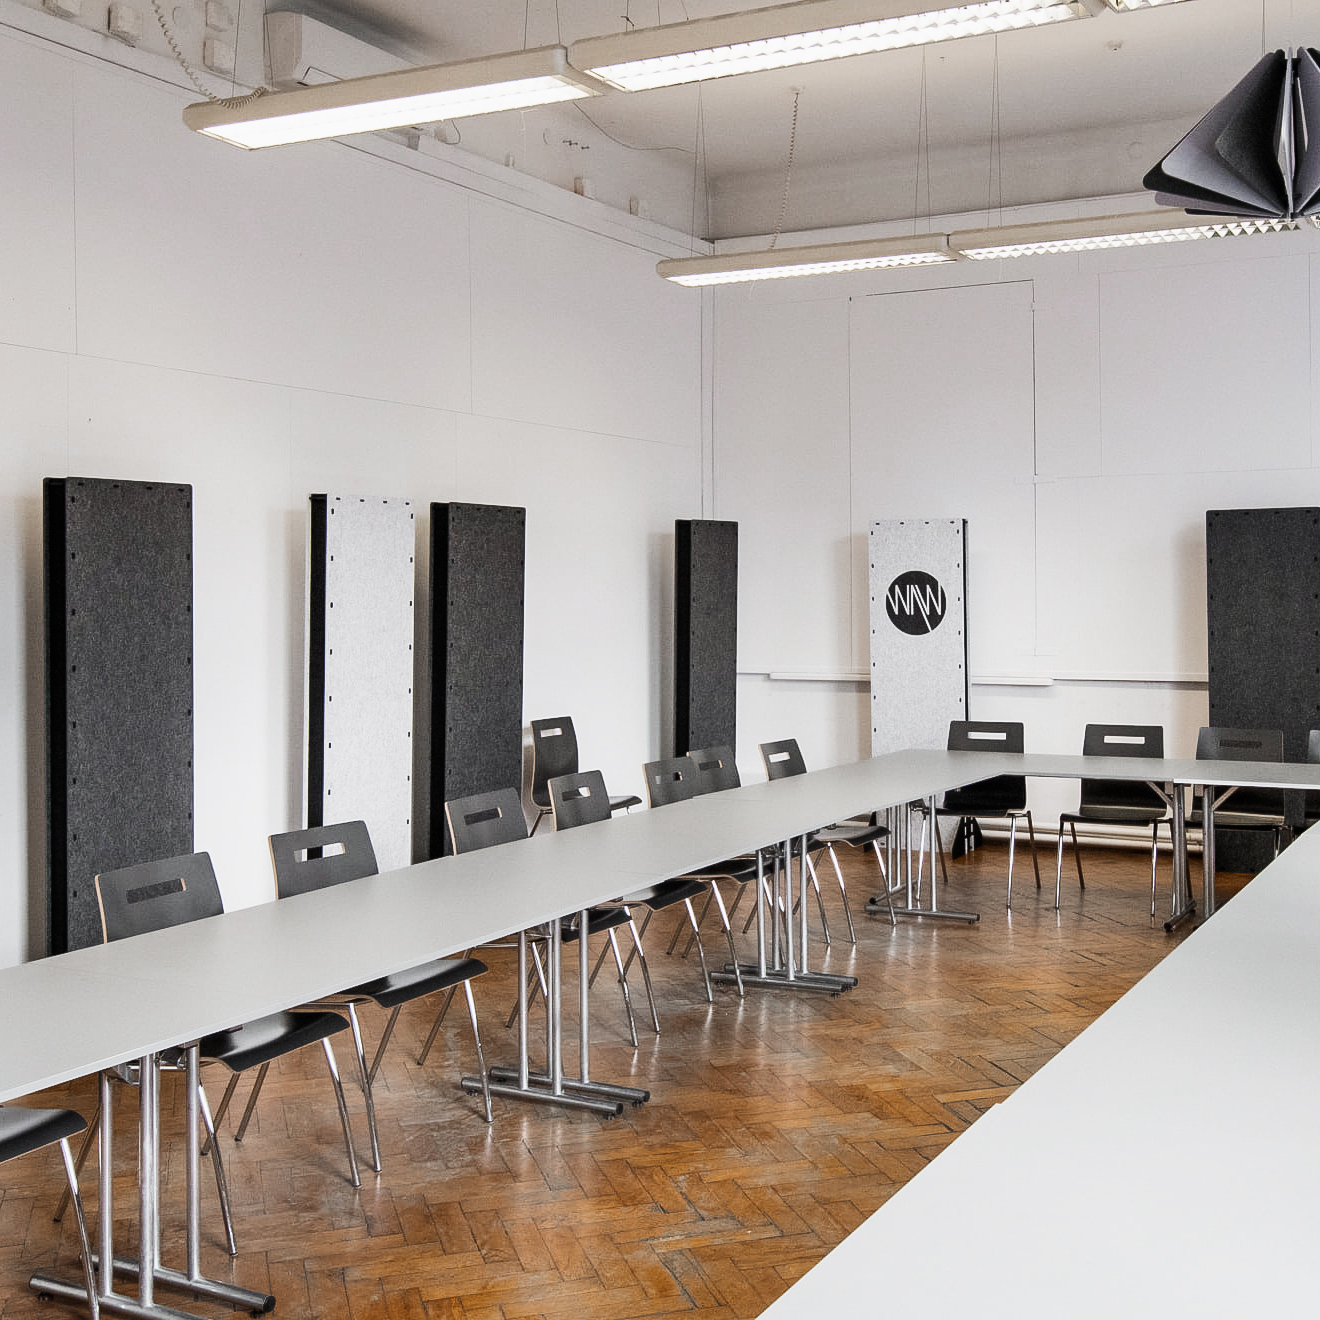 Lecture room after acoustic treatment at the Academy of Fine Arts in Krakow, where vertical sound absorbing acoustic blinds, acoustic, acoustic ceiling rafts absorbing reverberation and sound absorbing partitions are installed.